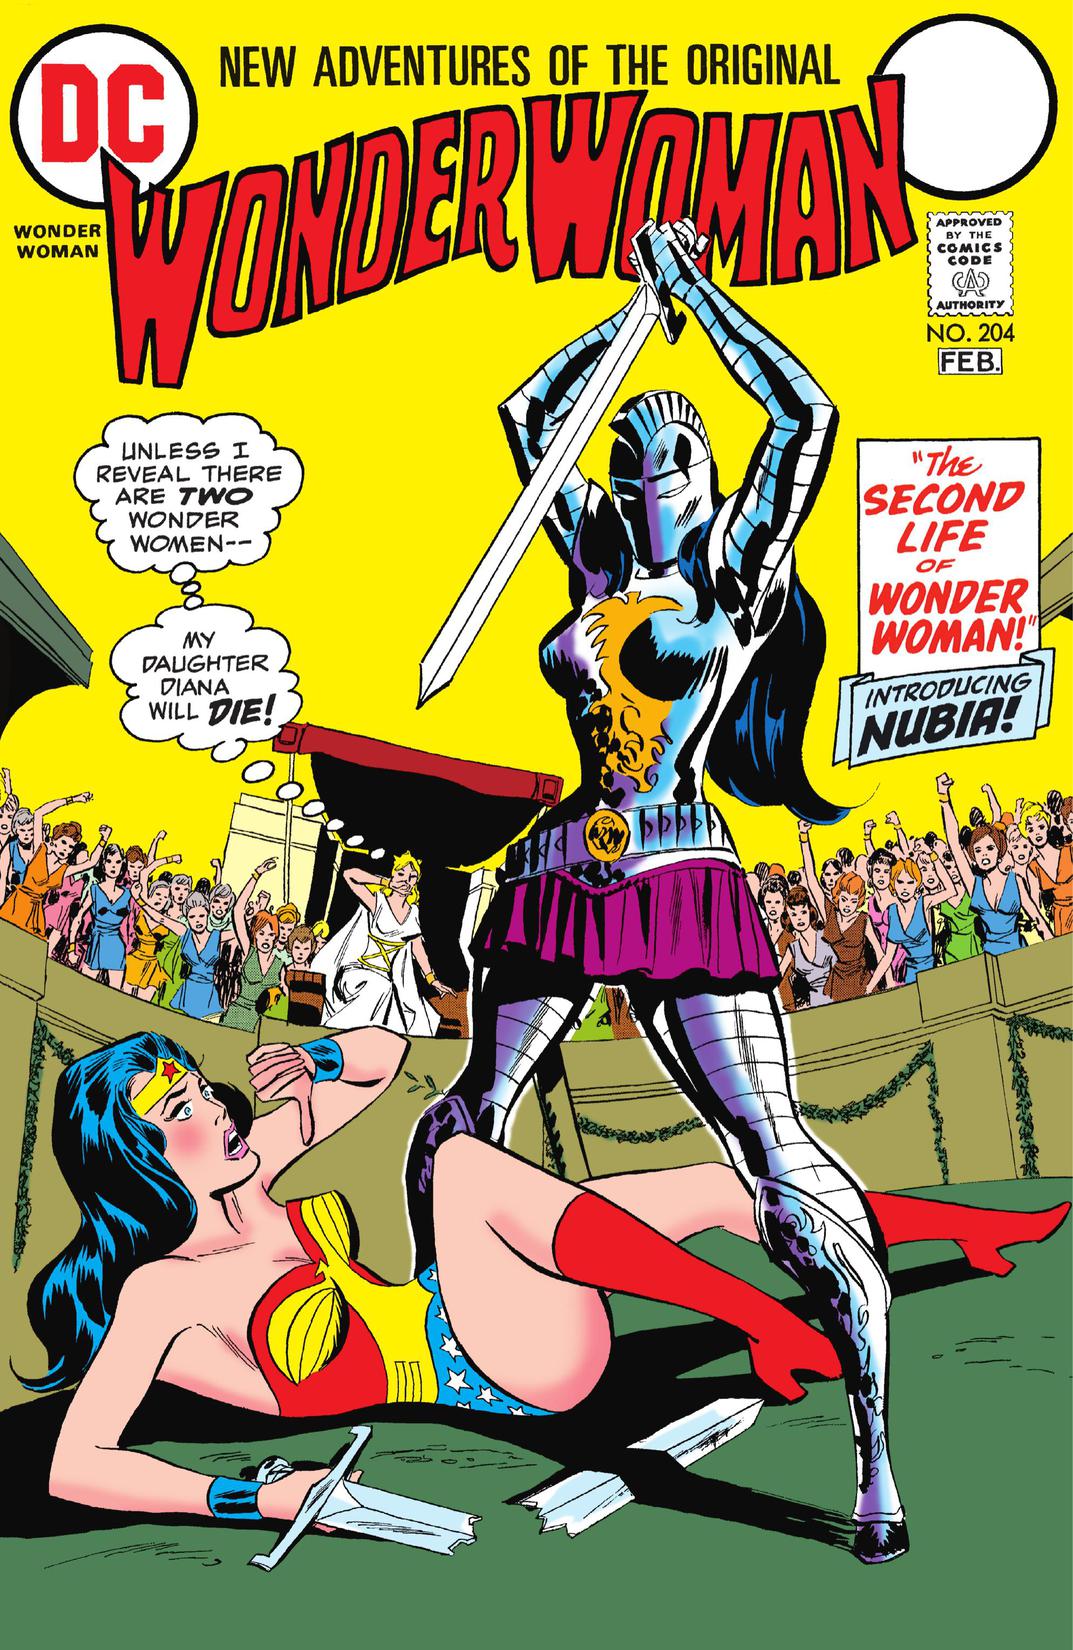 Wonder Woman (1942-1986) #204 preview images